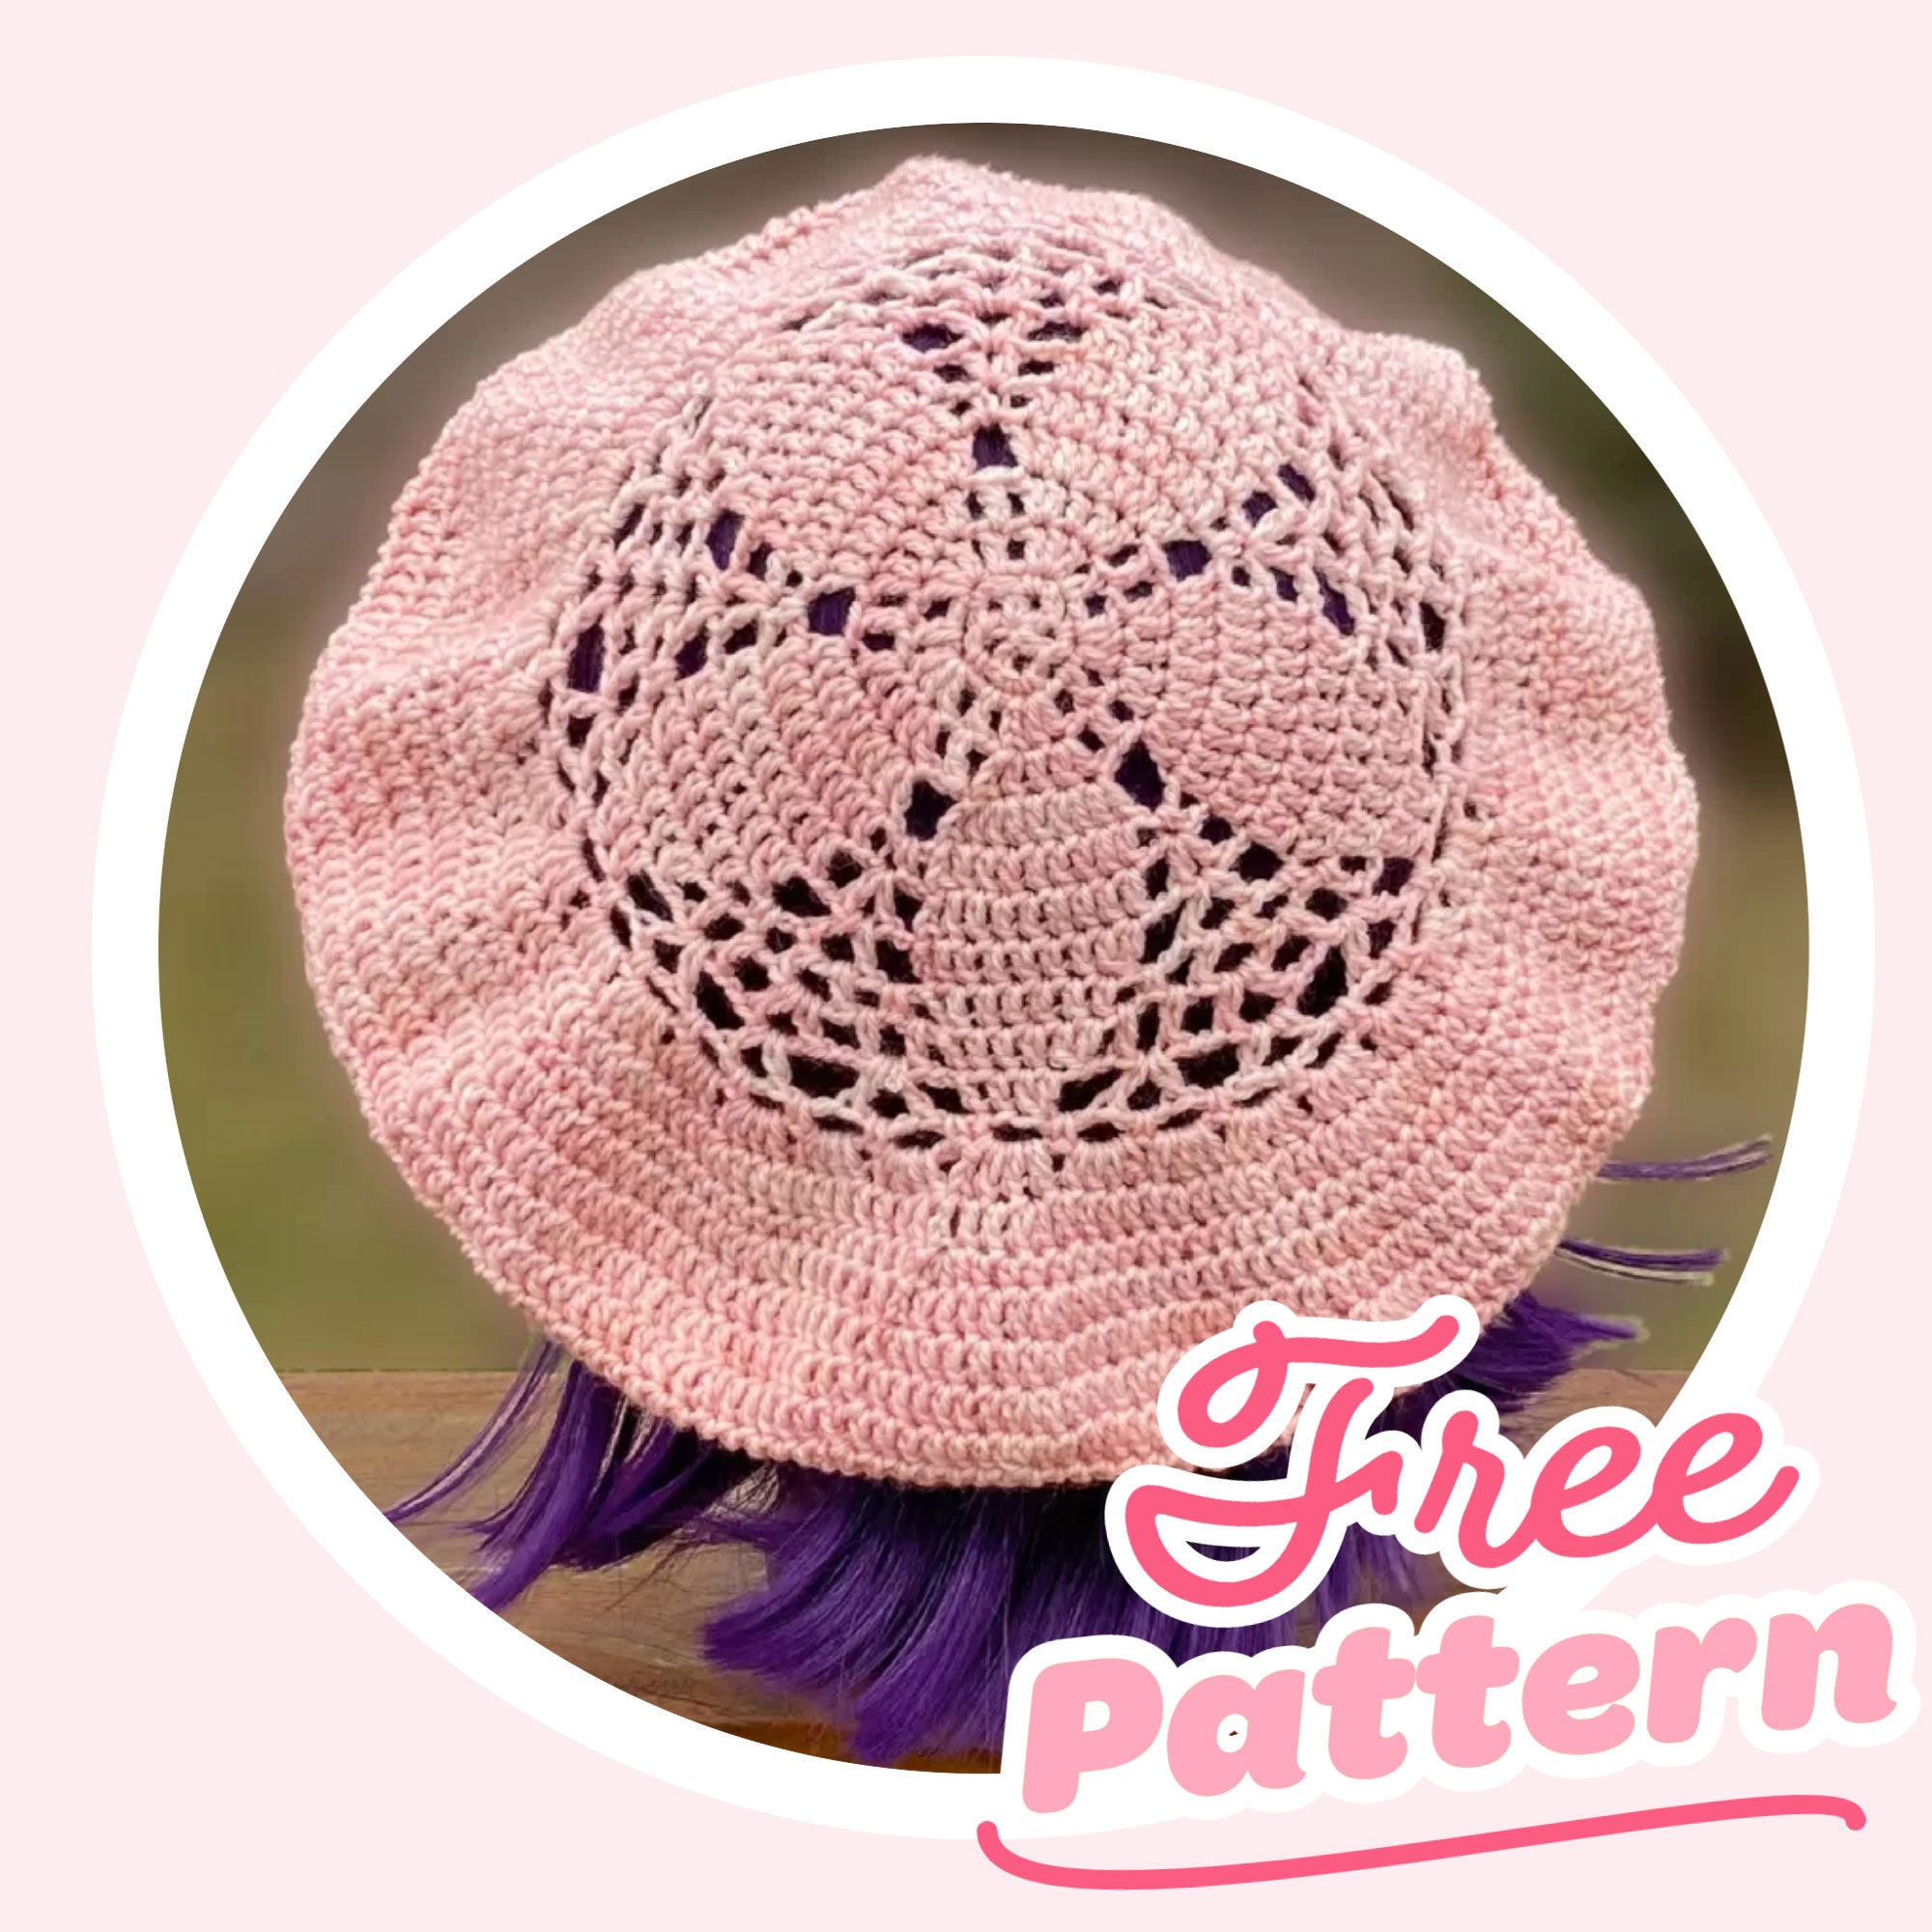 cherry blossom beret crochet pattern by stitches n scraps in cherry blossom hand dyed yarn from global backyard industries